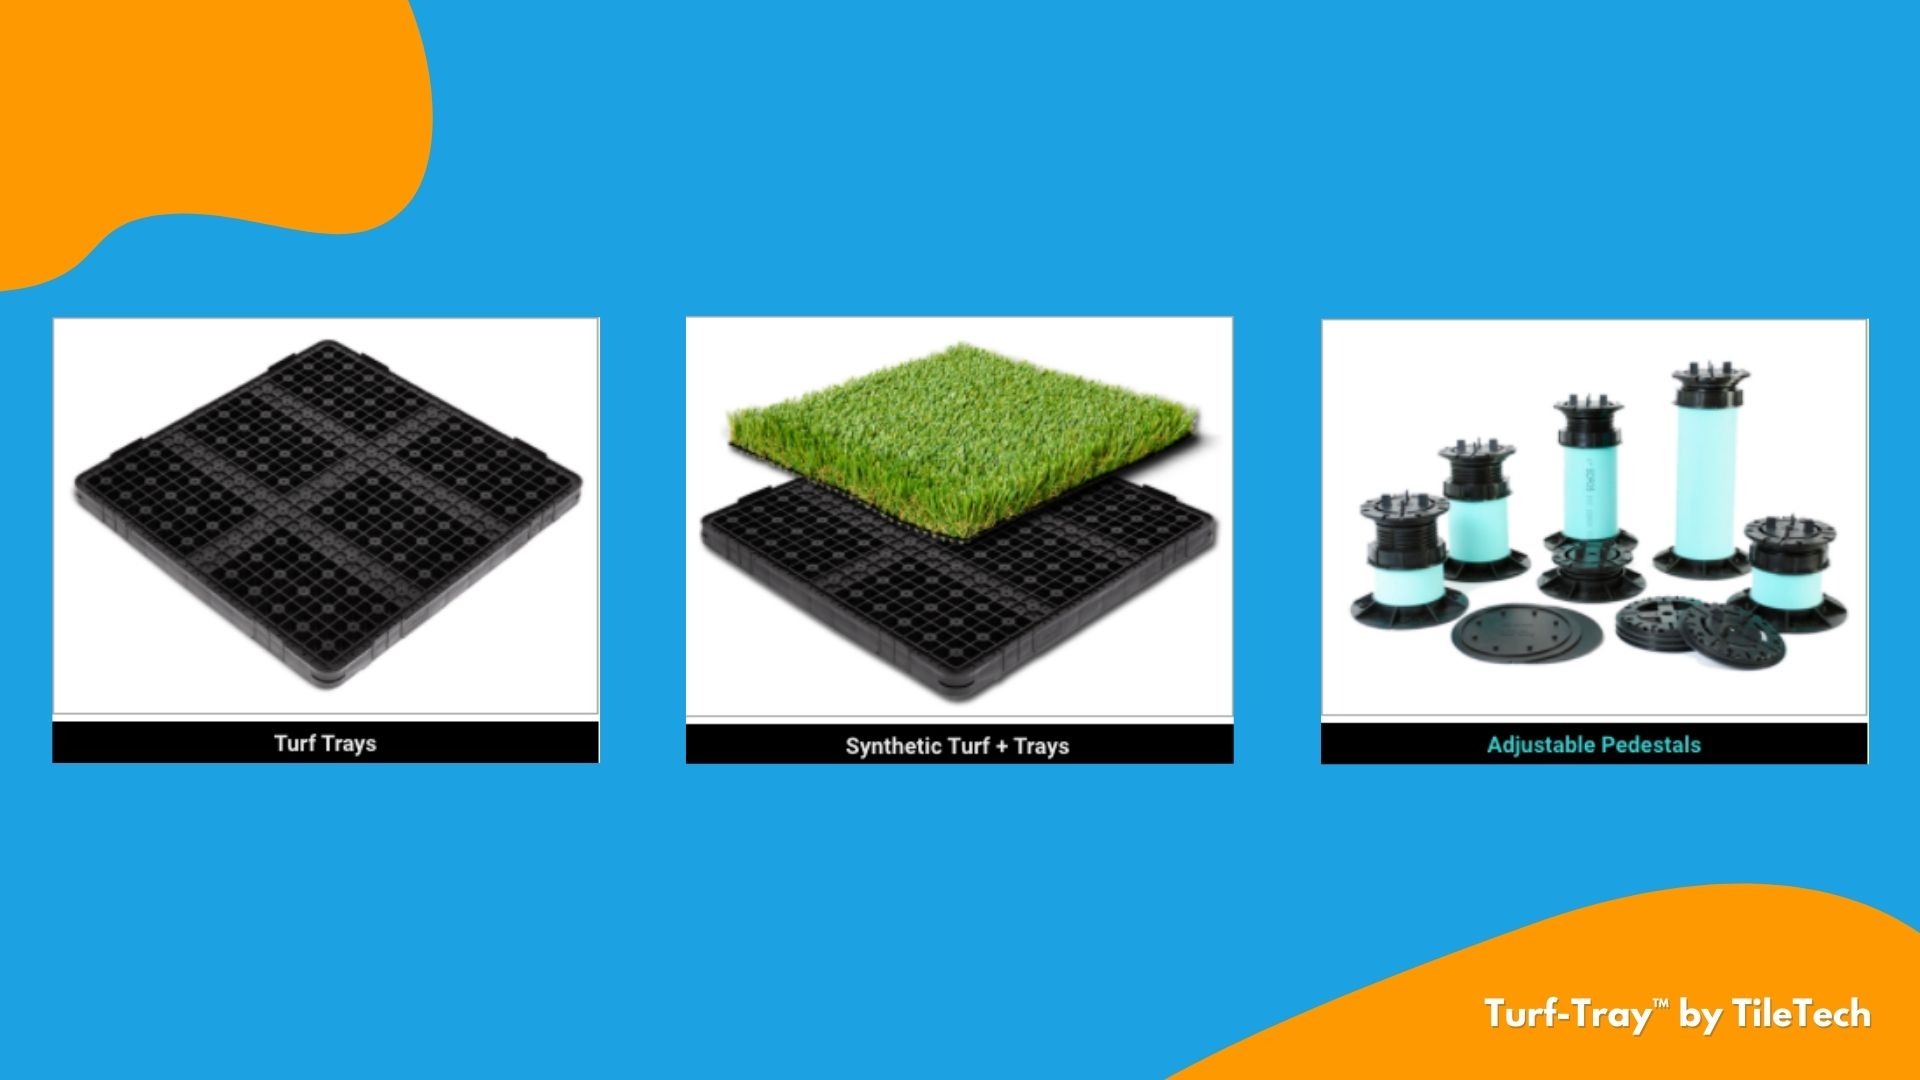 Turf Trays for rooftop and deck artificial grass applications by TileTech